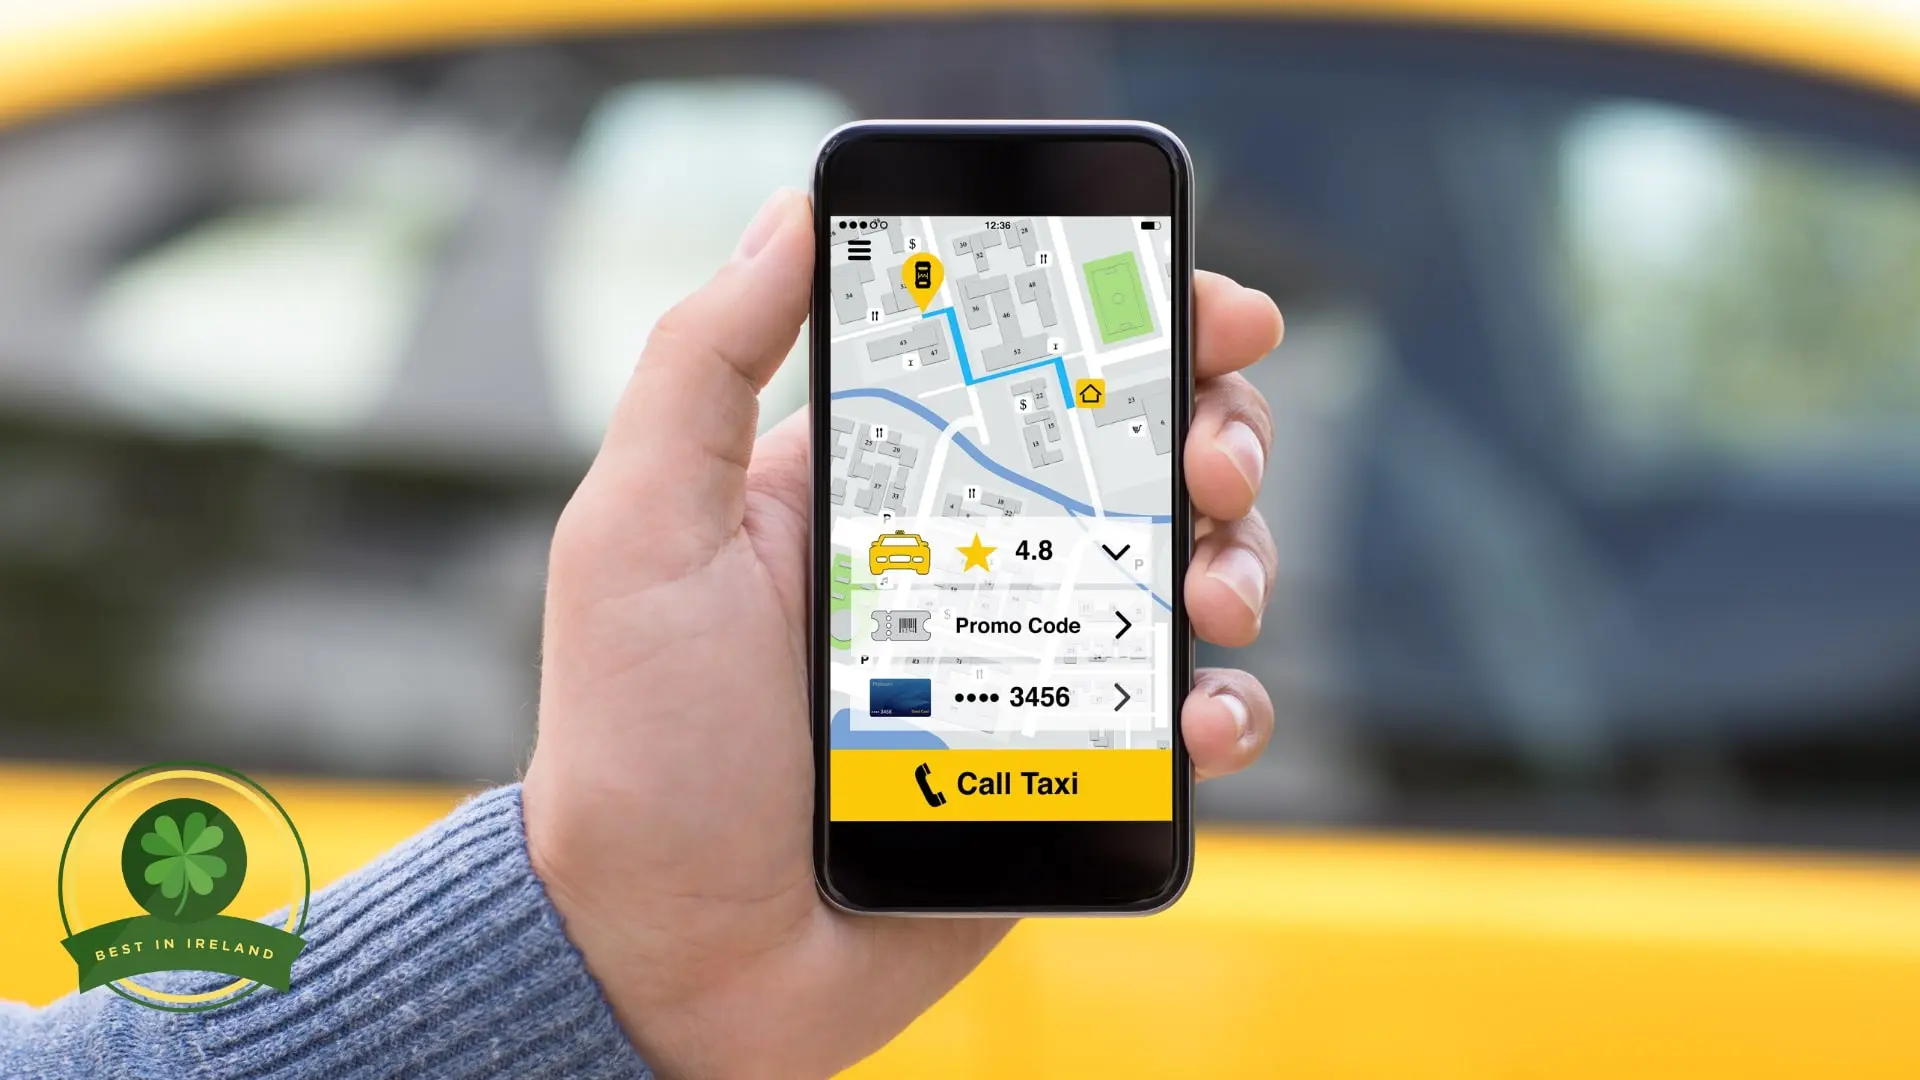 app taxi ireland - What taxi app should I use